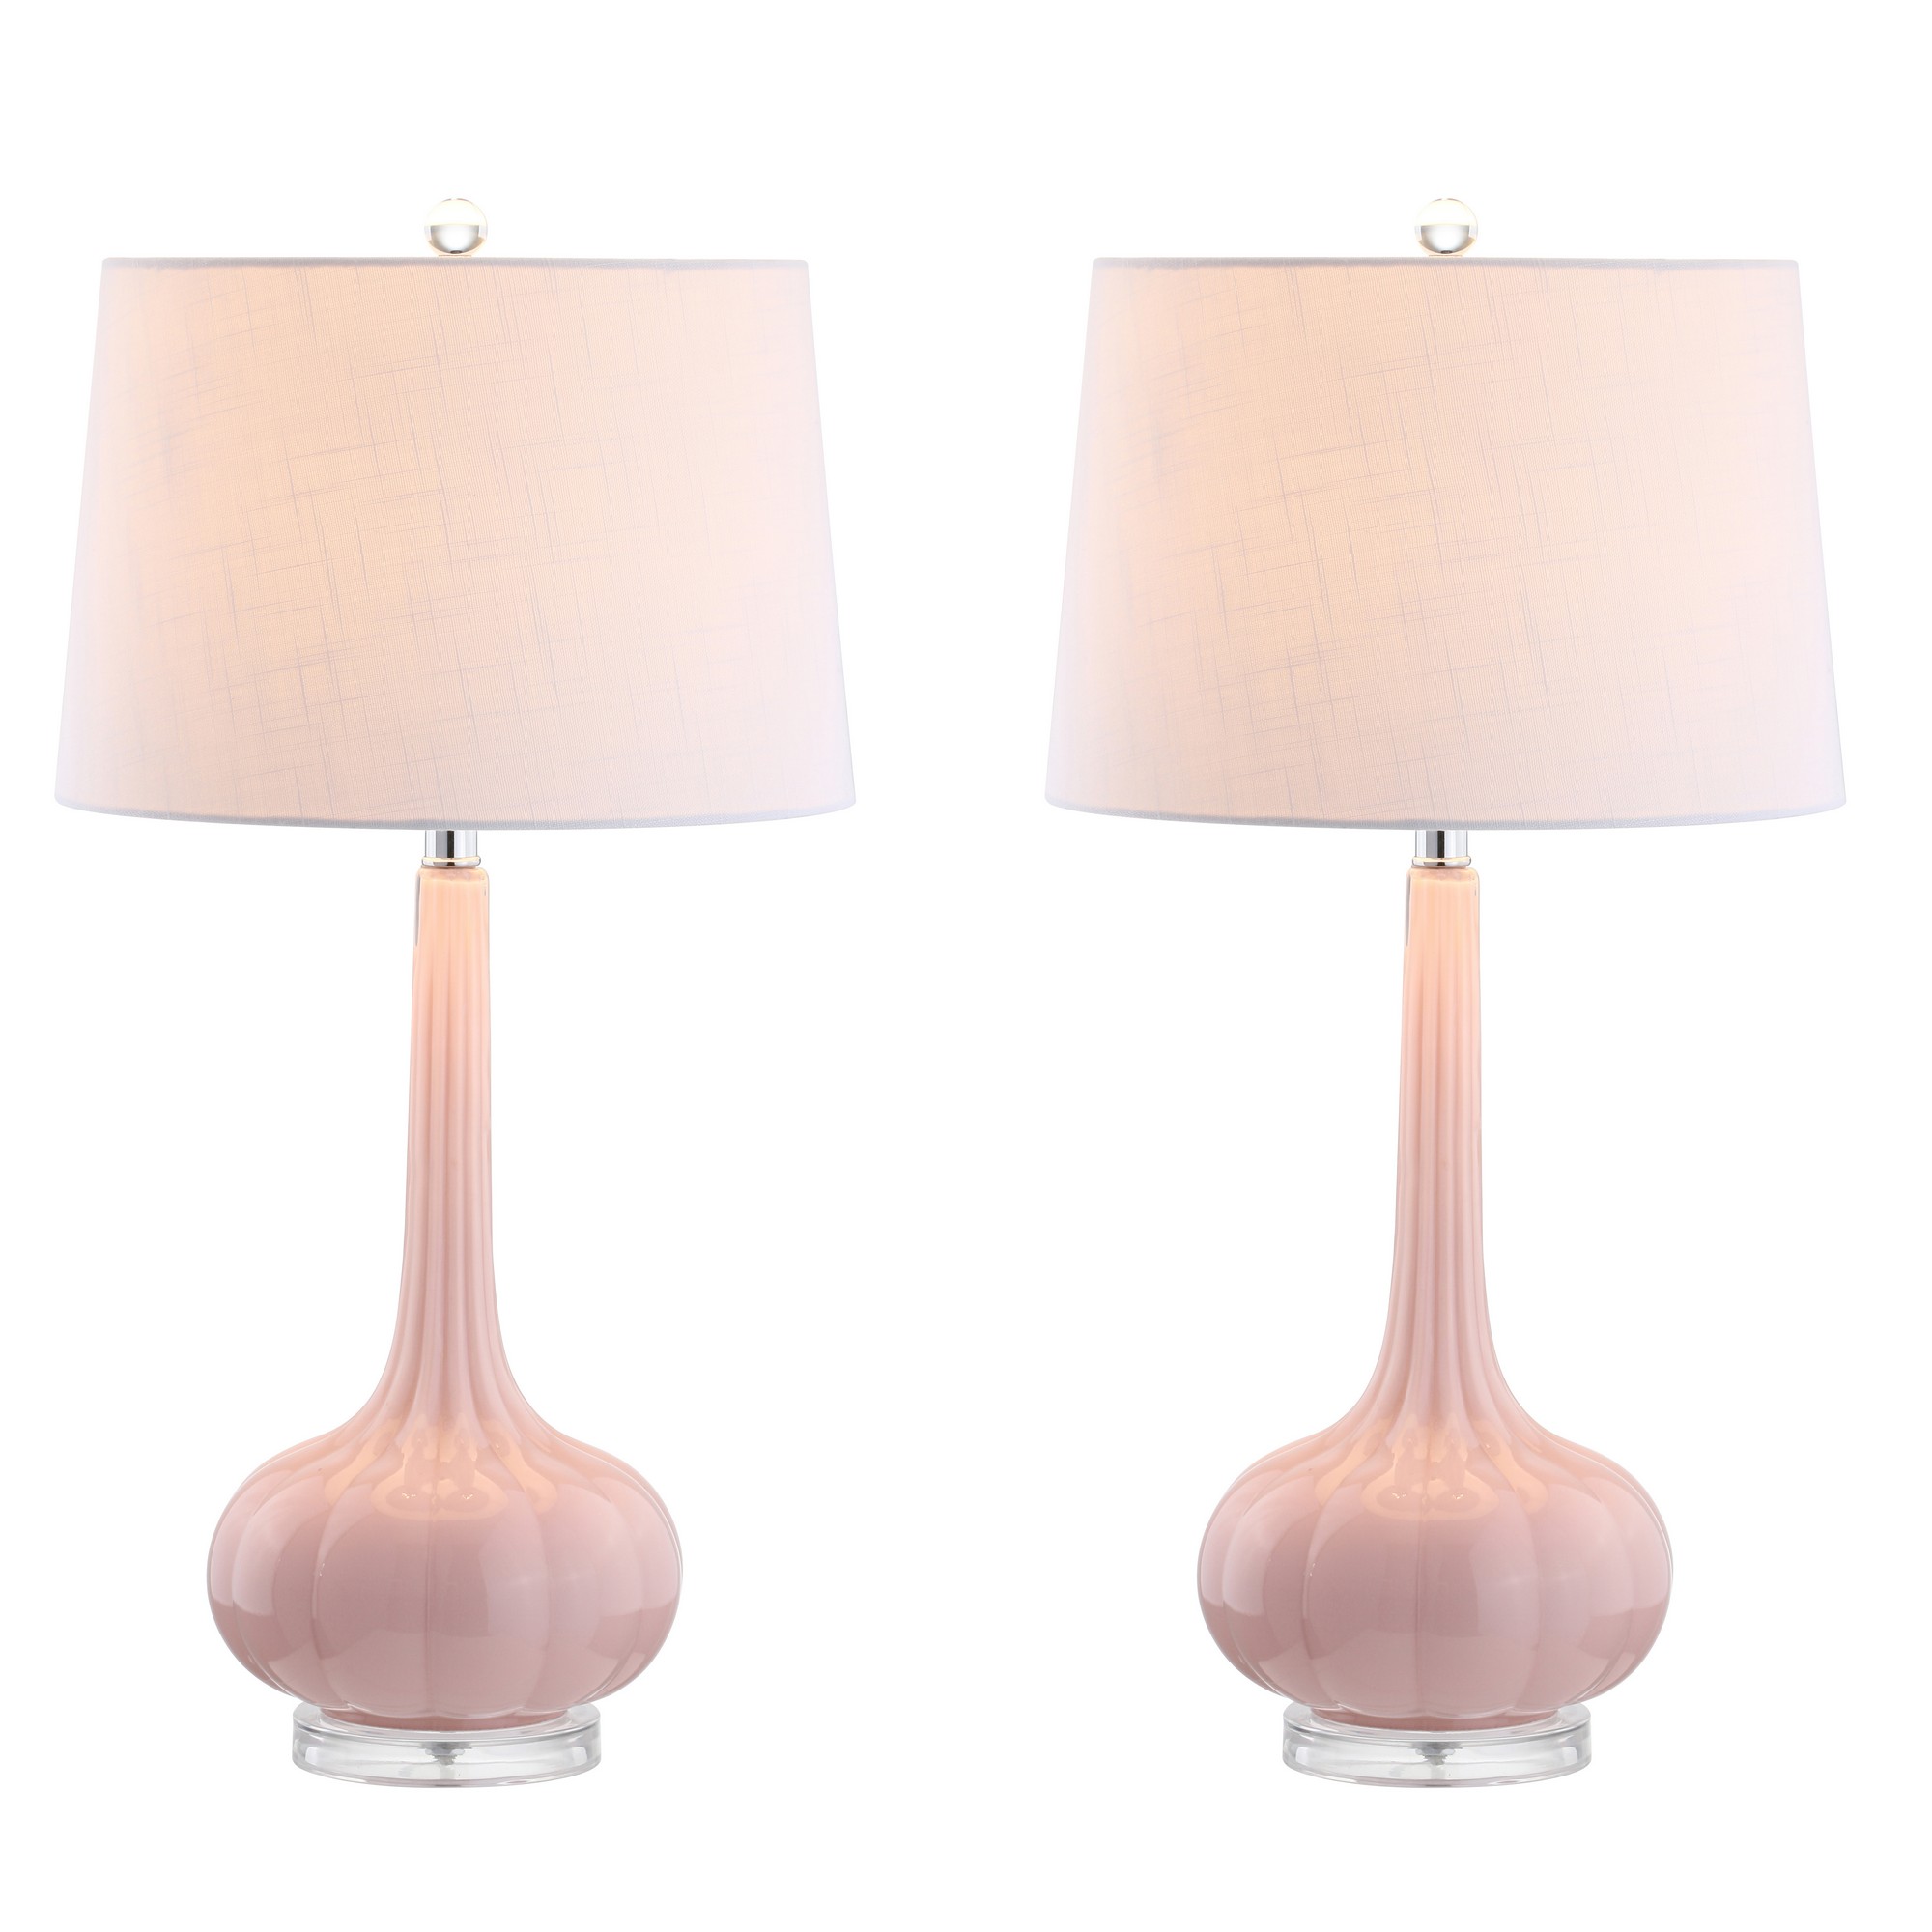 Bette 28.5" Glass Teardrop LED Table Lamp, Pink (Set of 2) - image 1 of 6